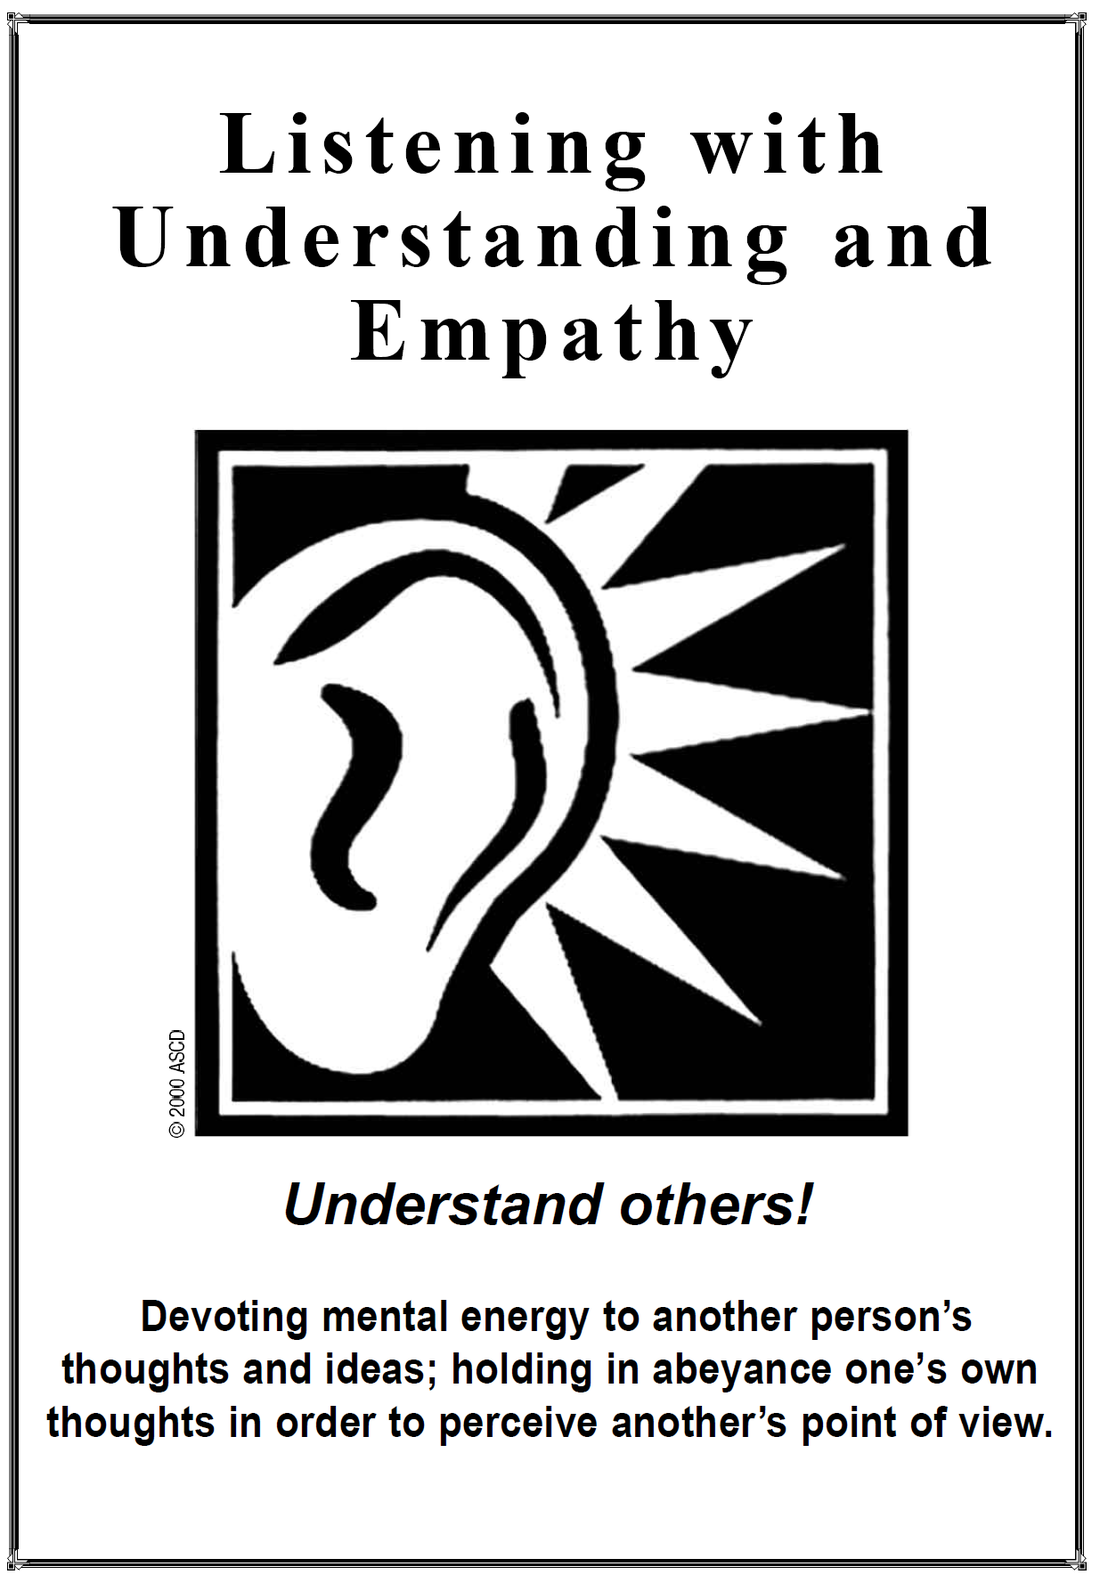 listening to others with understanding and empathy